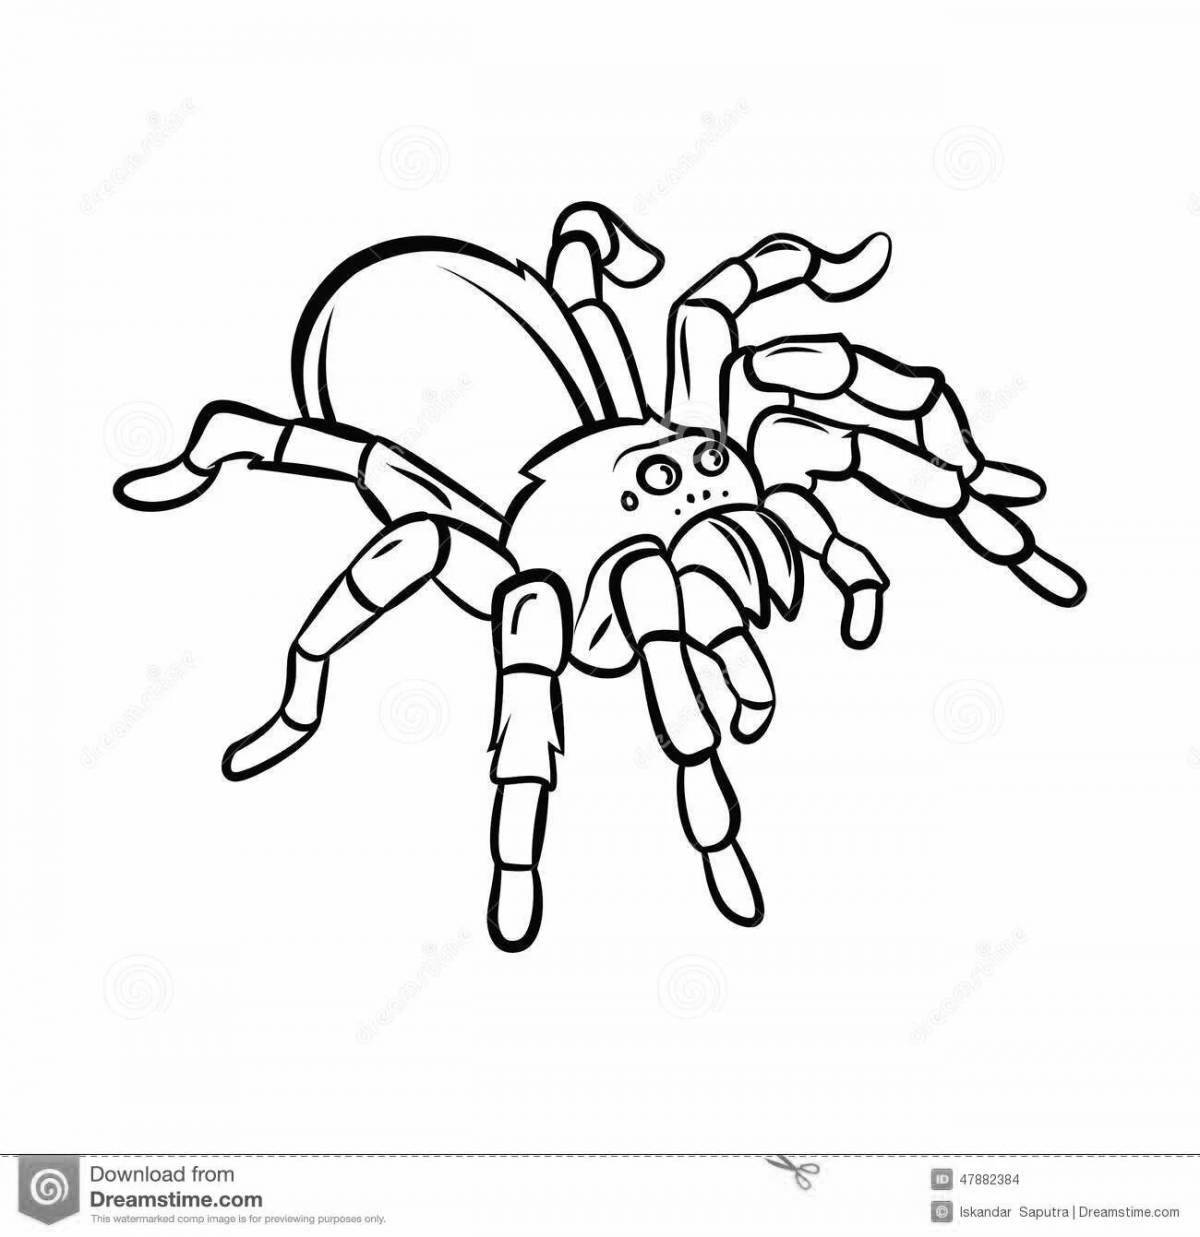 Awesome tarantula spider coloring page